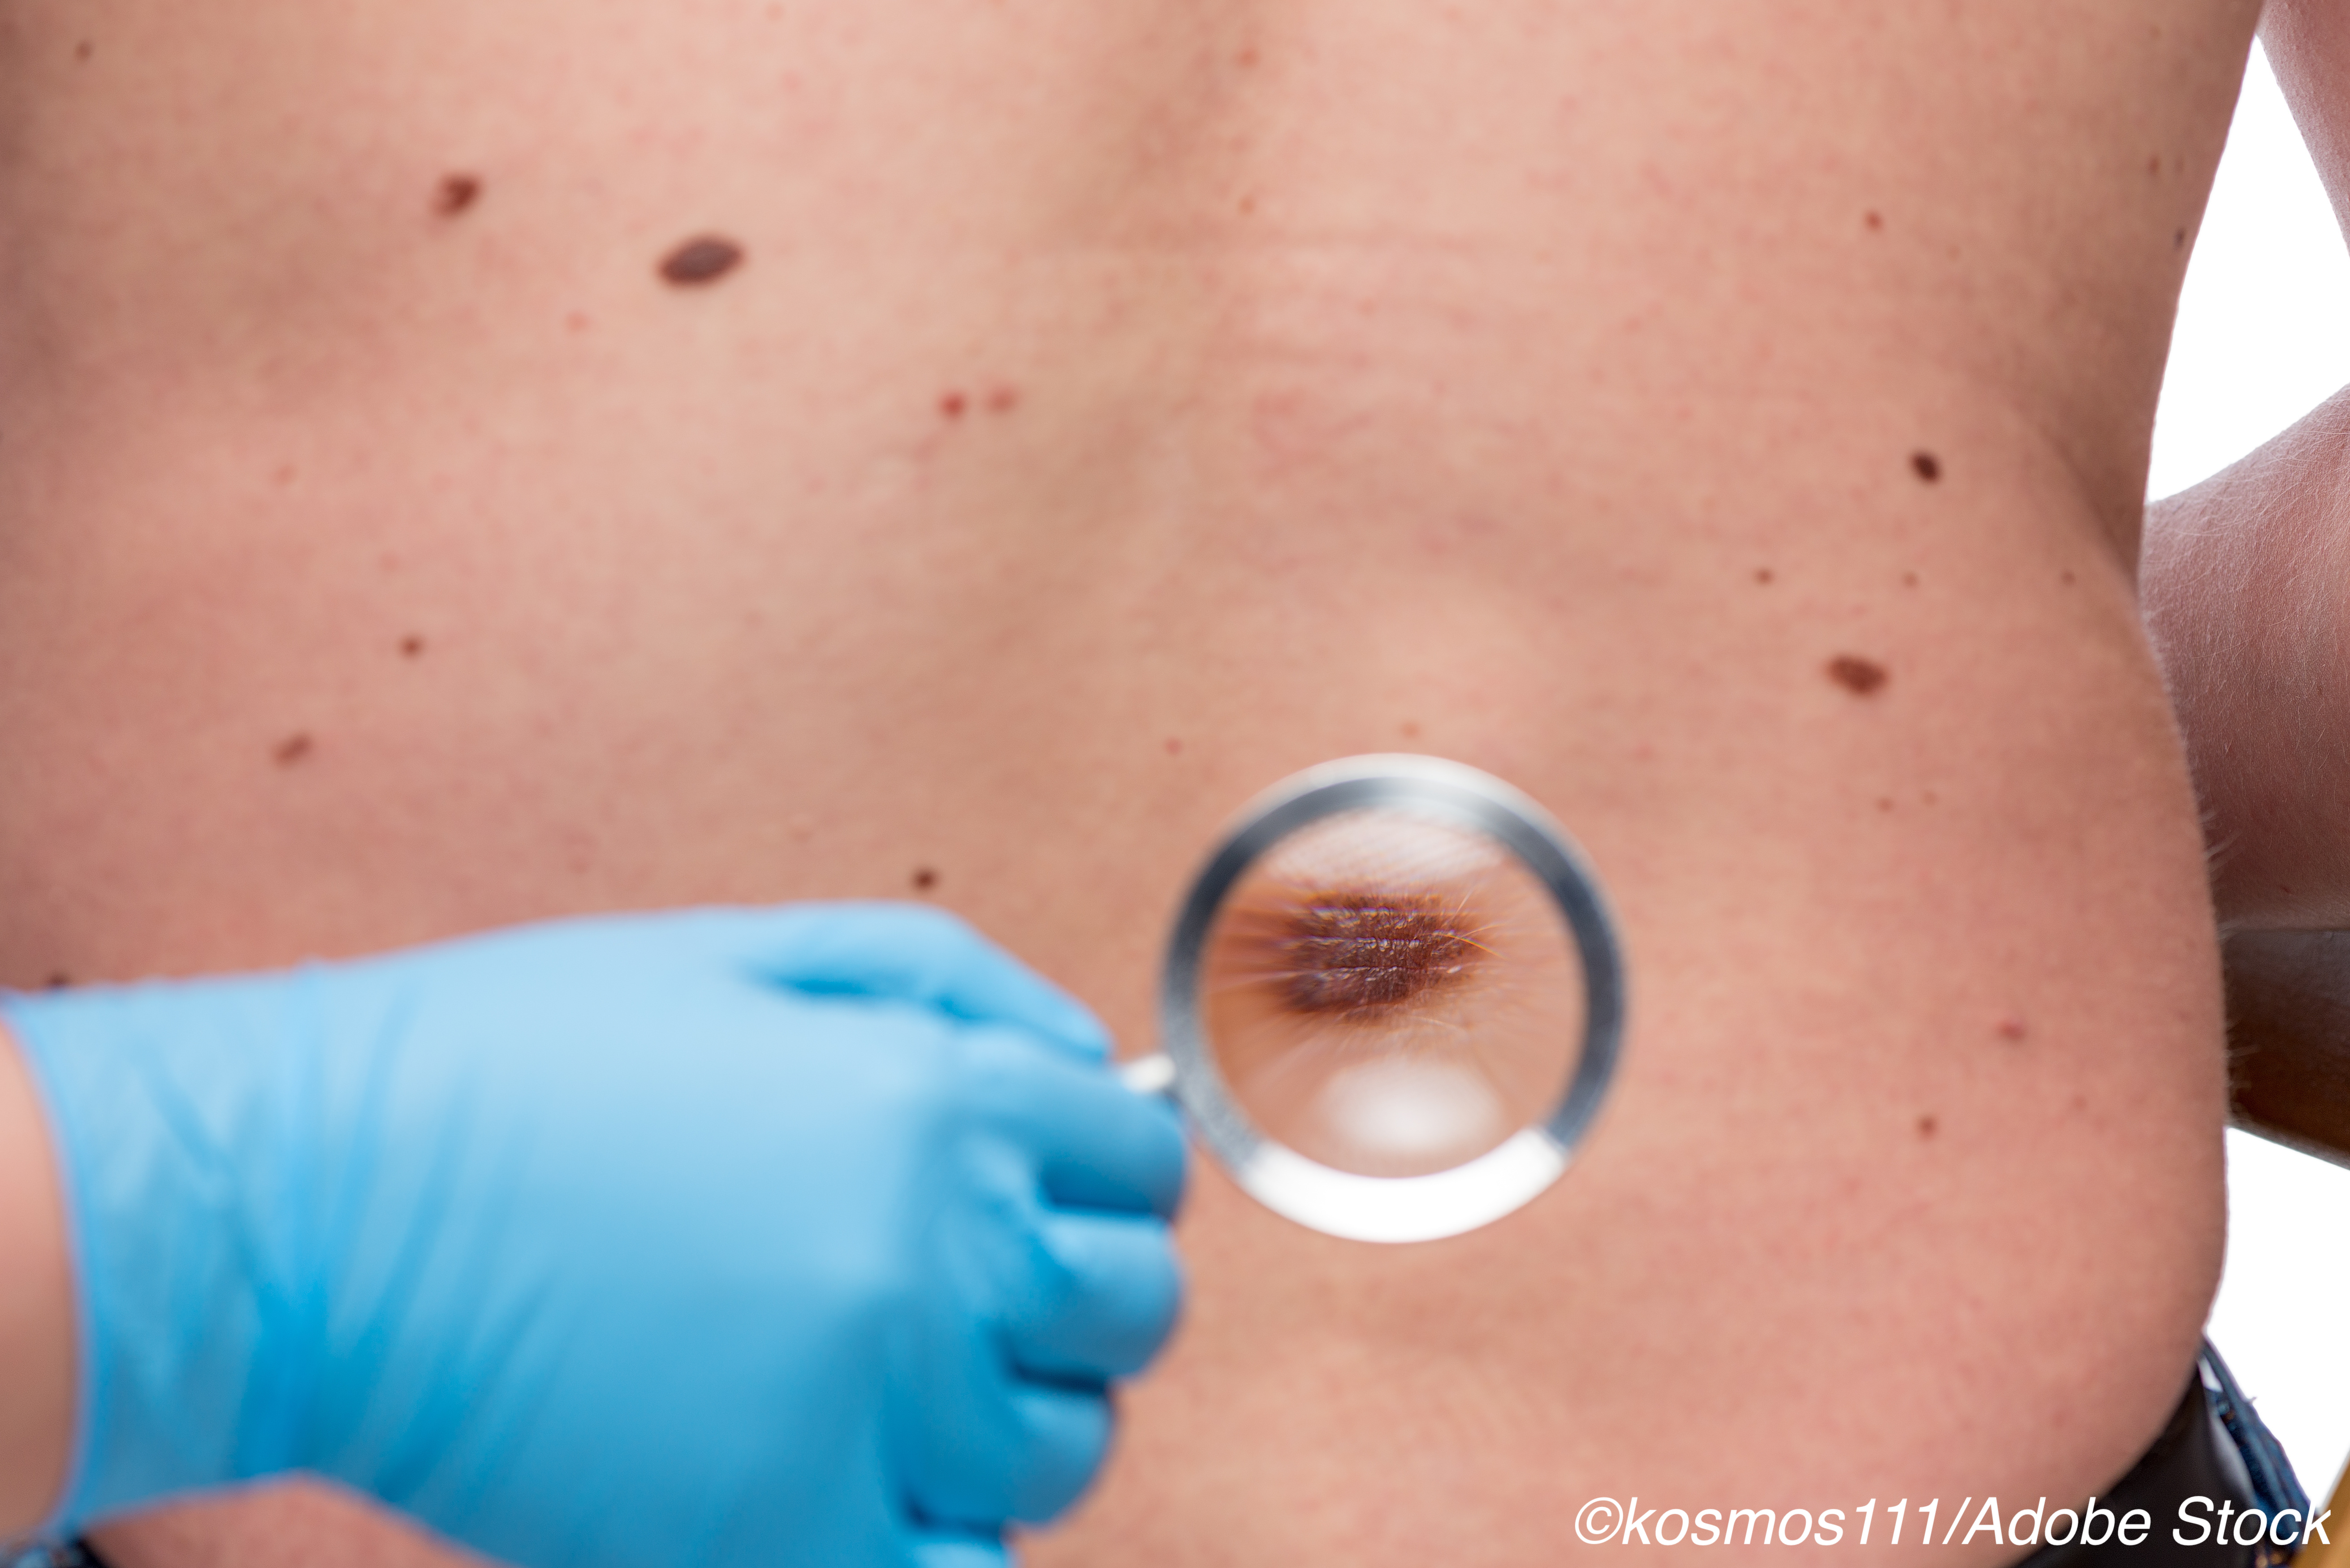 GEP Tests Fail to ID Recurrence Risk in Cutaneous Melanoma